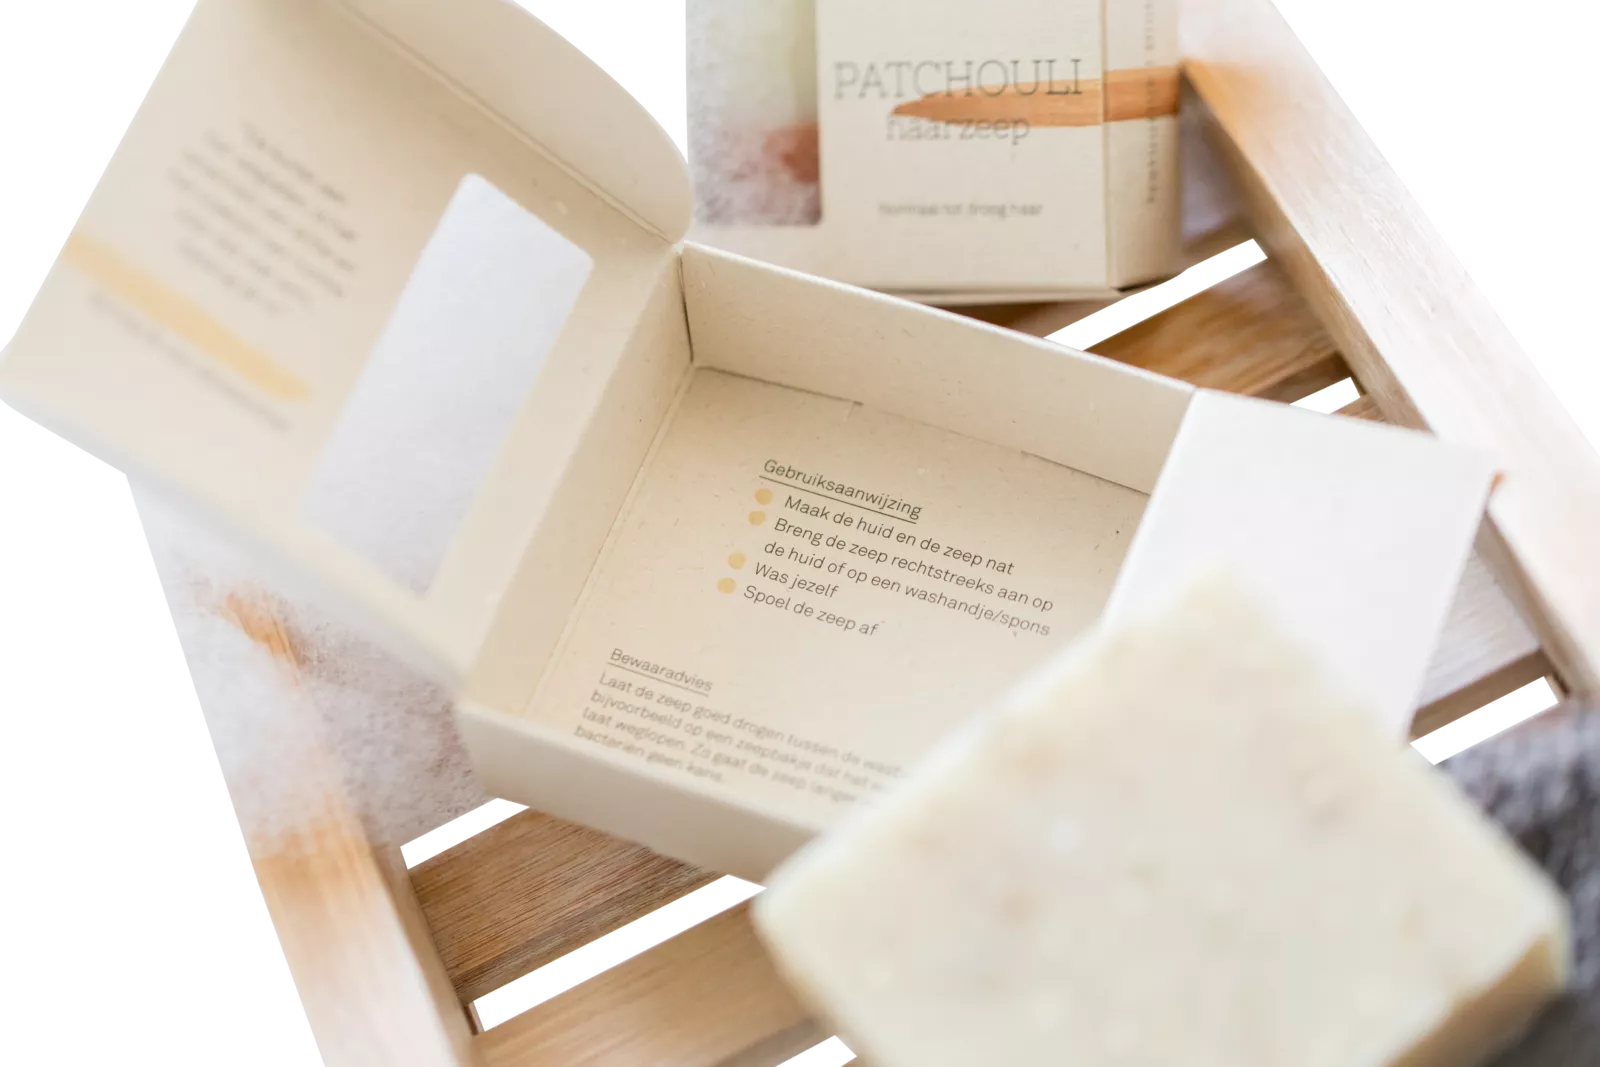 PaperWise eco friendly paper sustainablesoap bar box packaging BotmaenvanBennekom8c